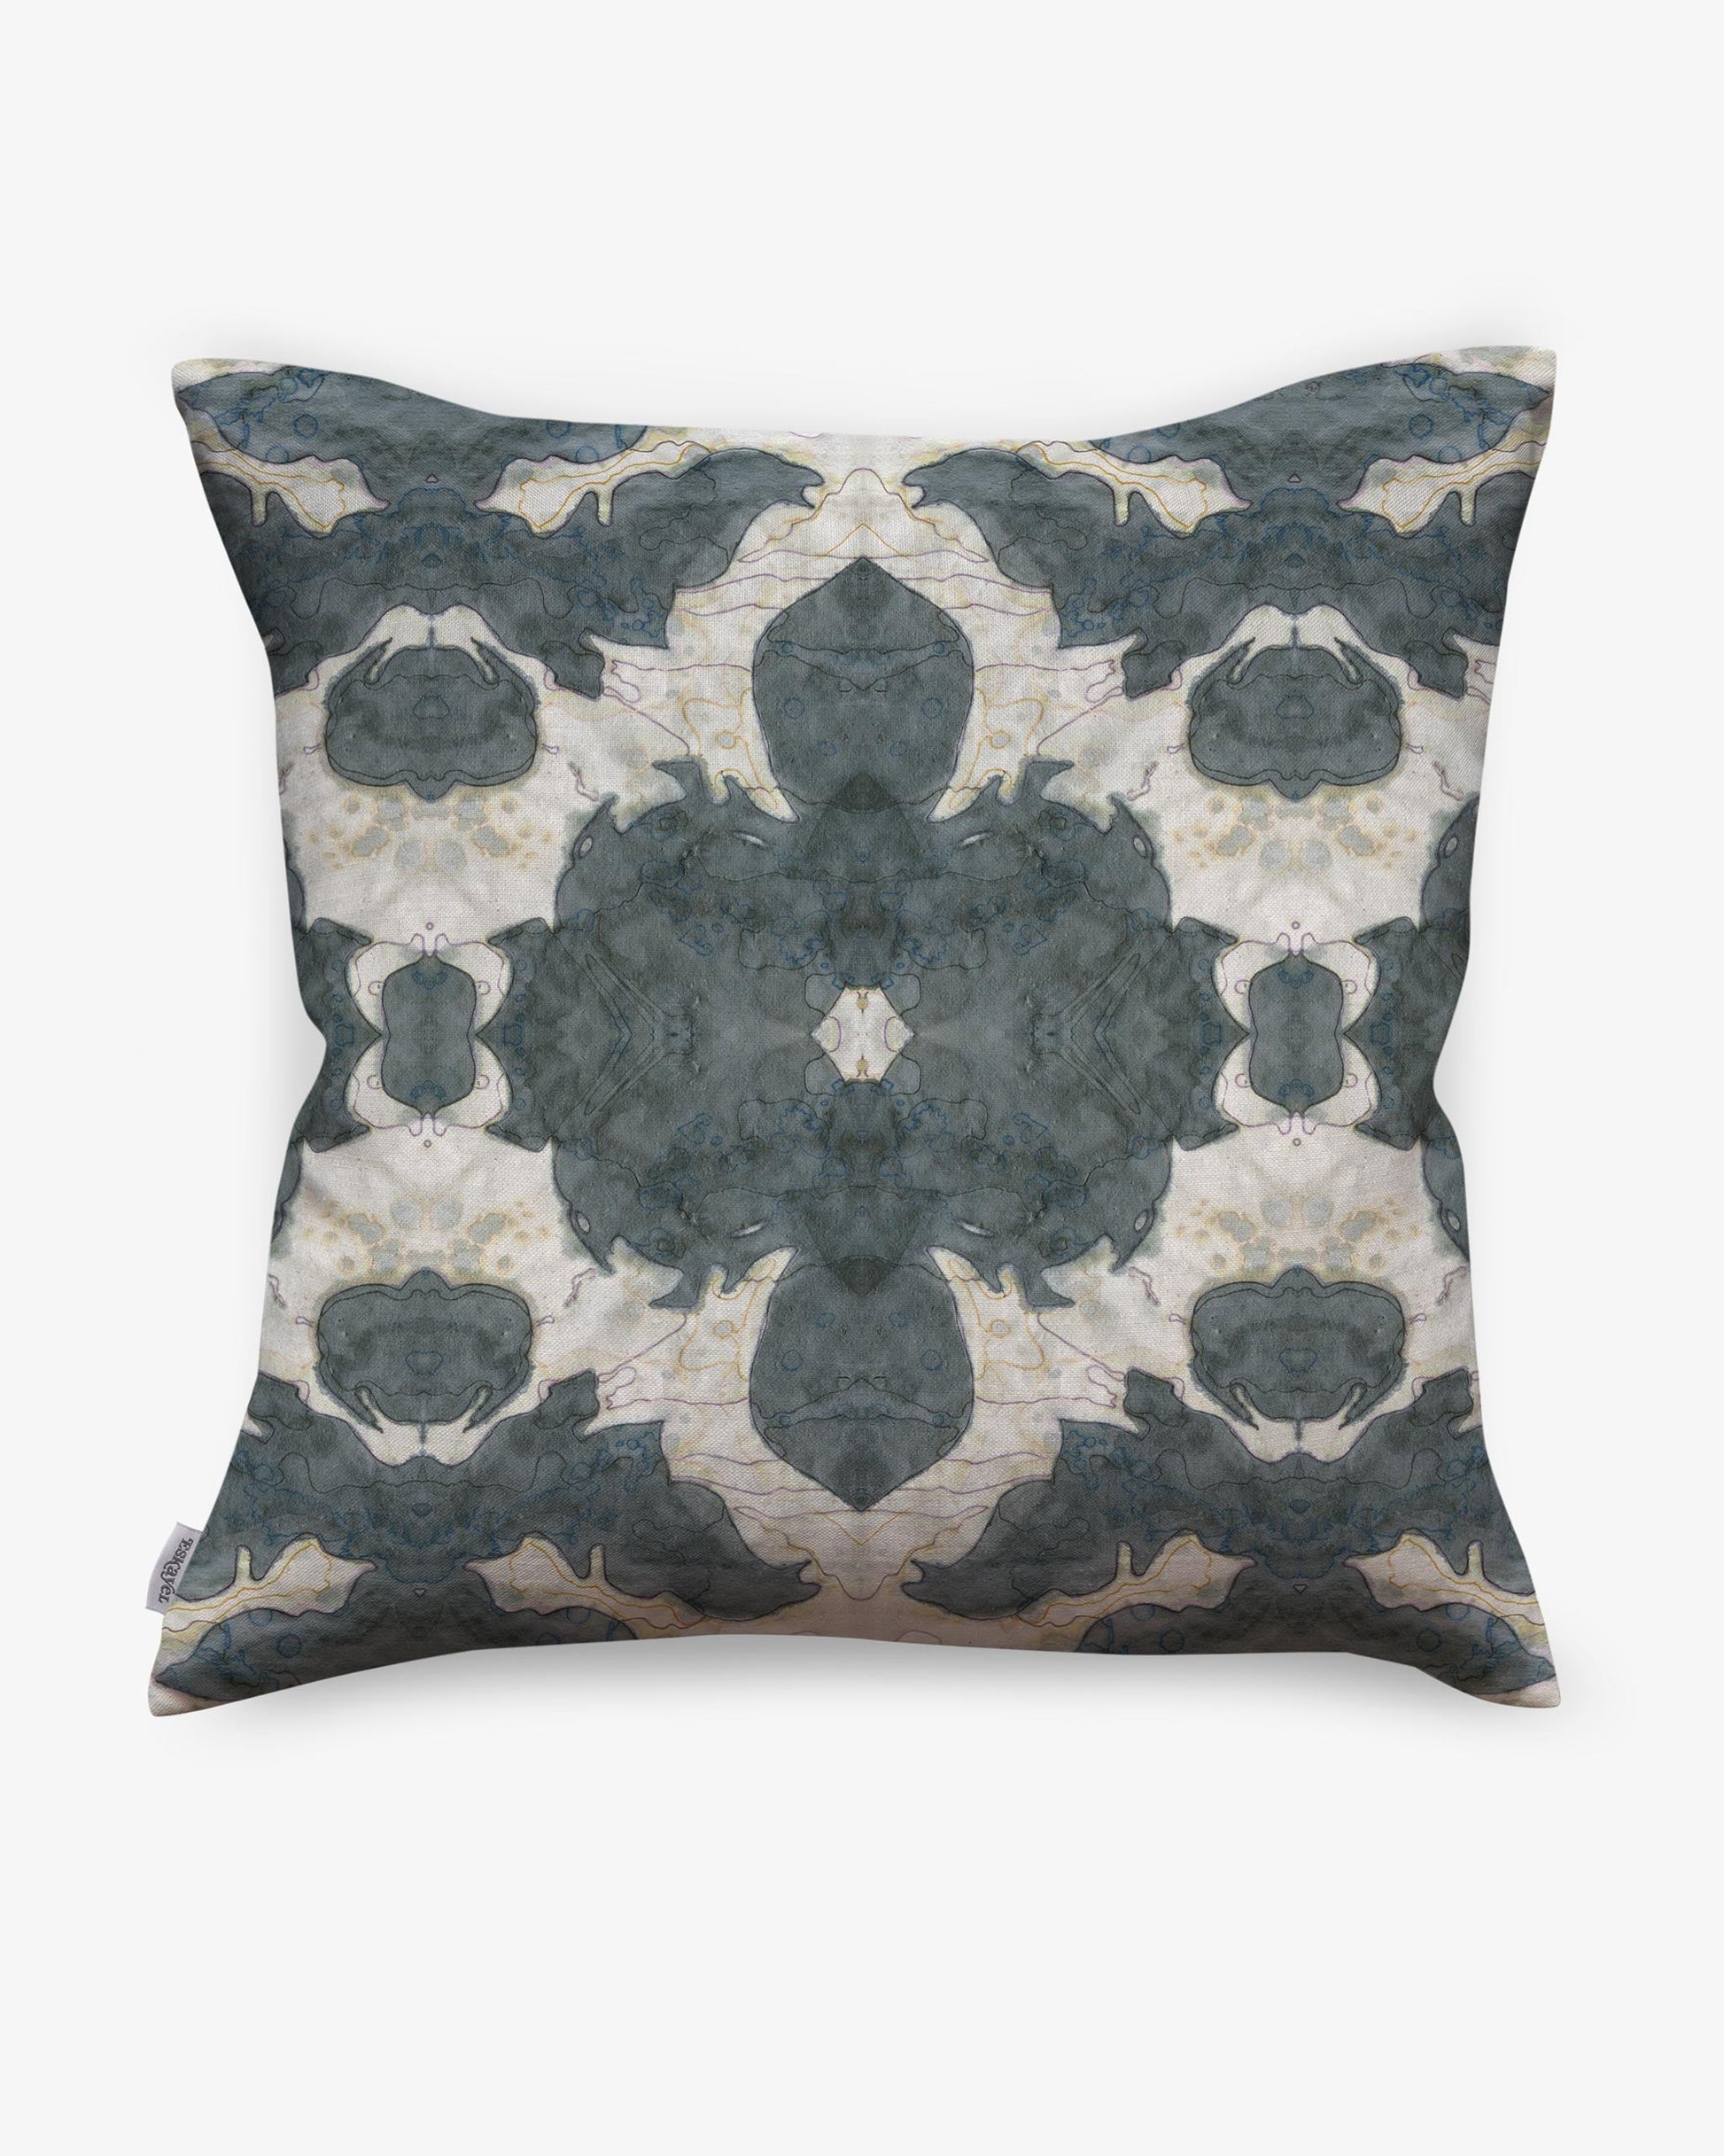 A cushion with a blue and white floral pattern made of fabric and feather pillows from the Lora Collection in the Olive colorway, The Dance Pillow Olive